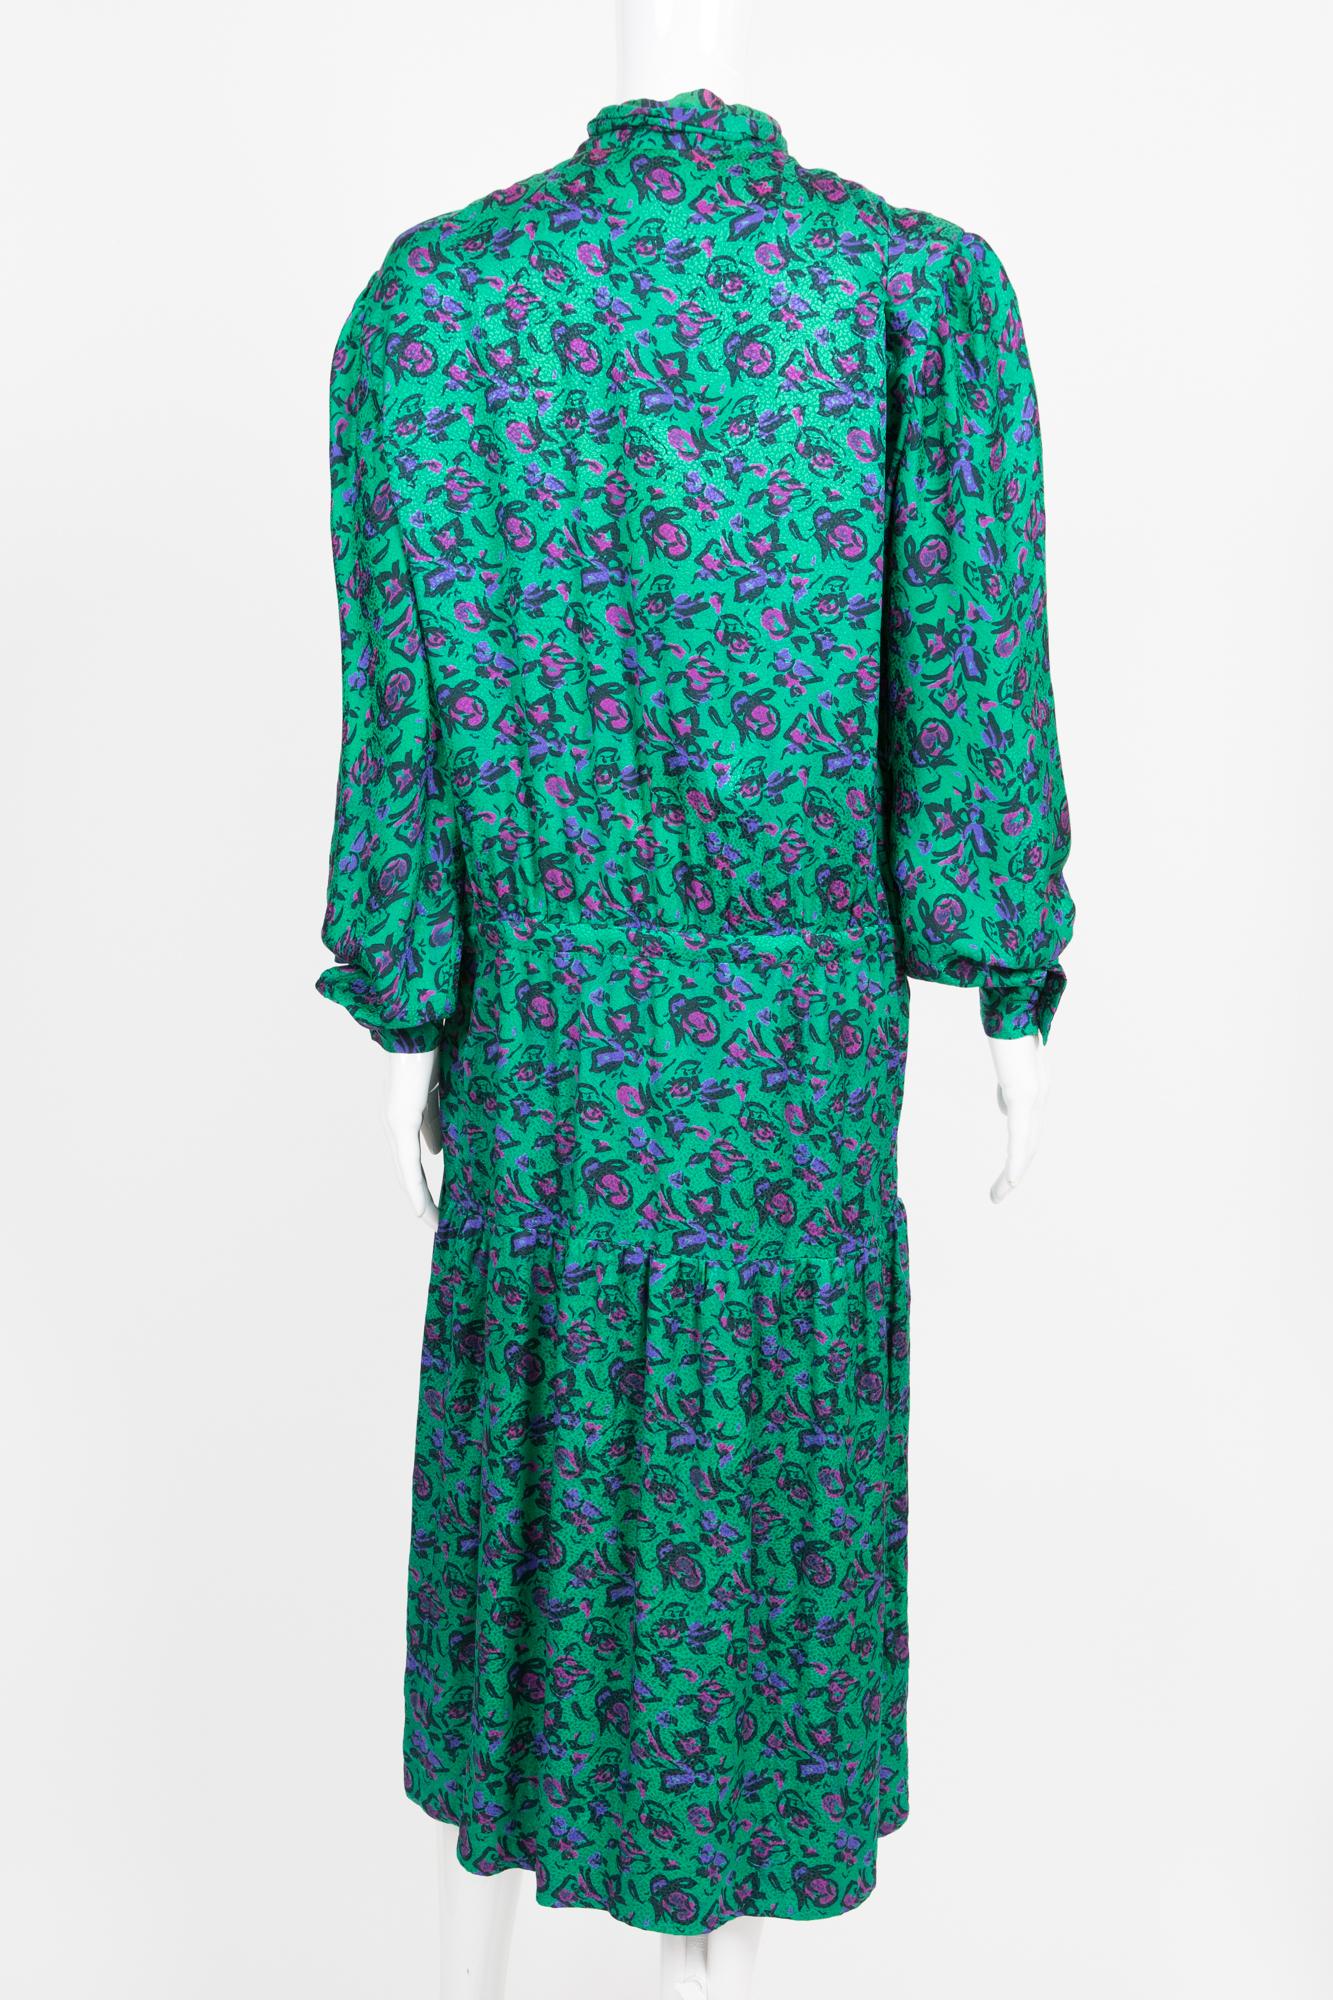 1975 Lanvin Haute Couture Silk Dress Numbered For Sale 1